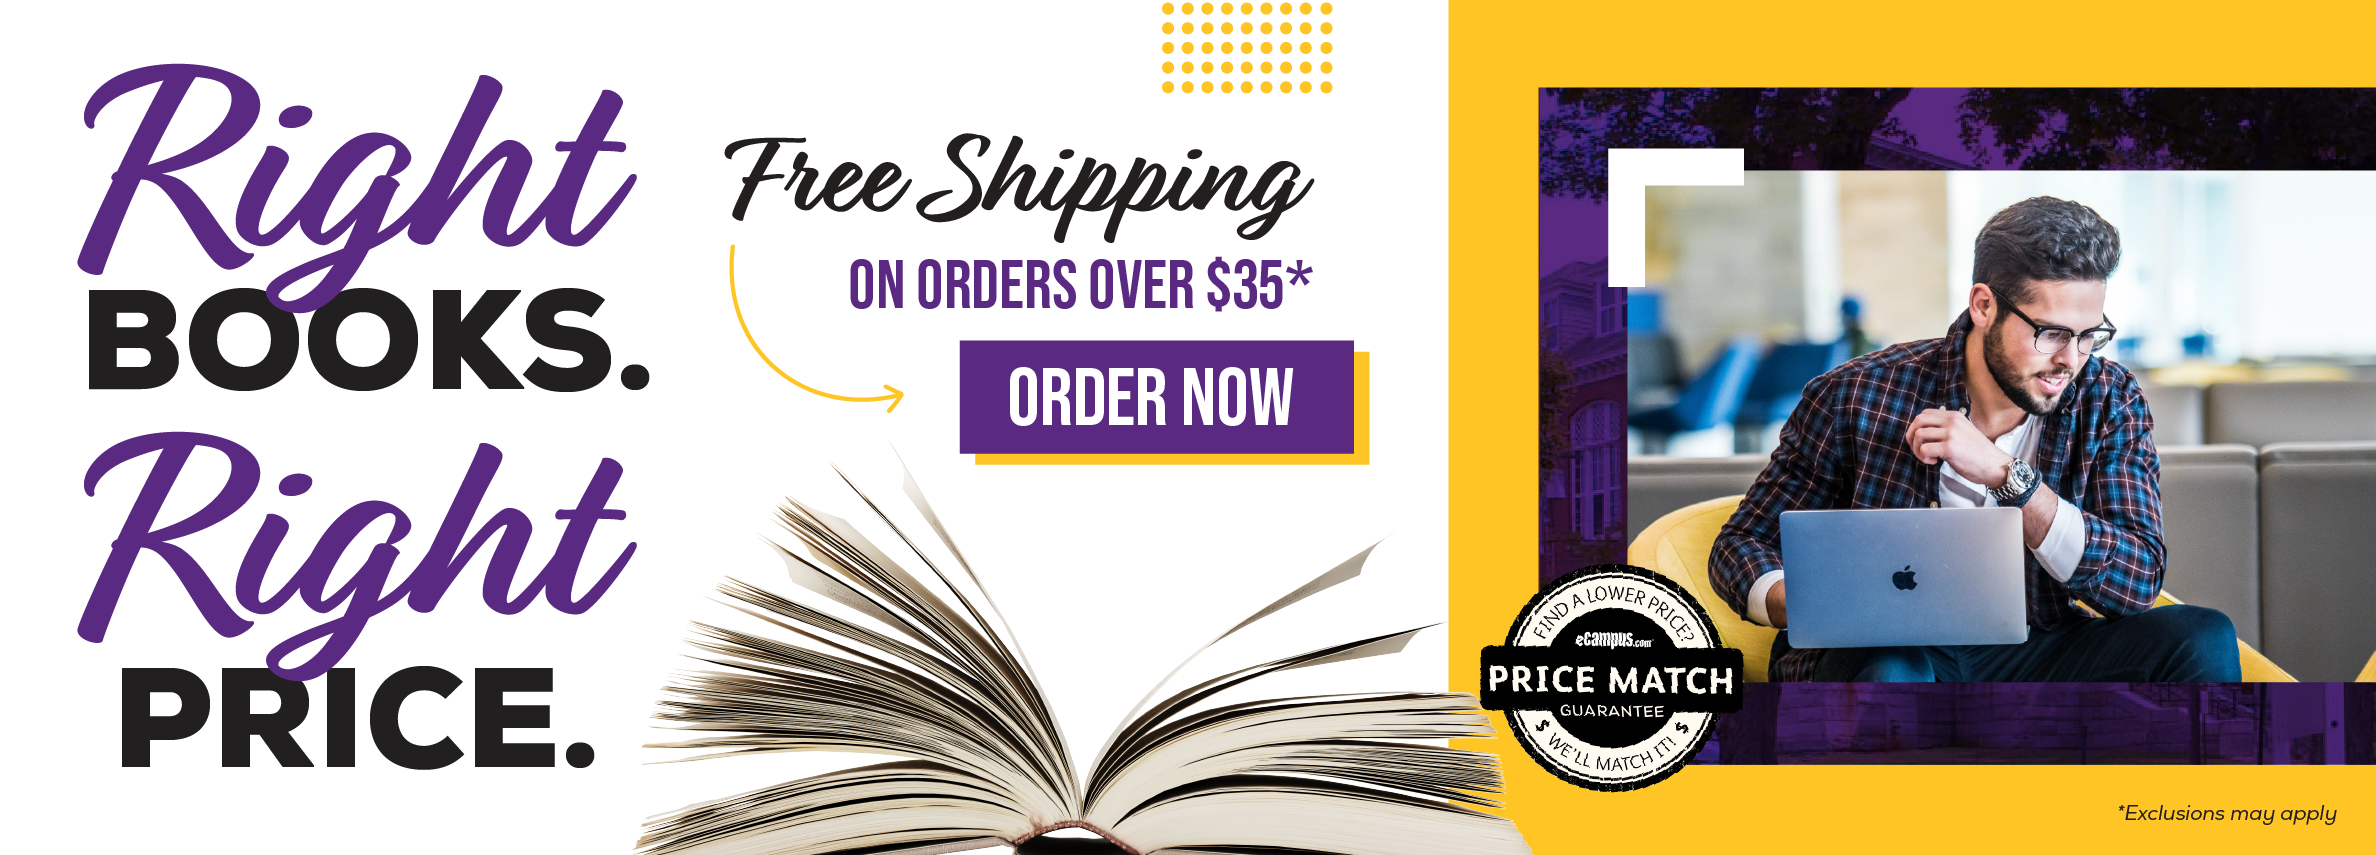 Right books. Right price. Free shipping on orders over $35.* Order now. Price Match Guarantee. *Exclusions may apply.